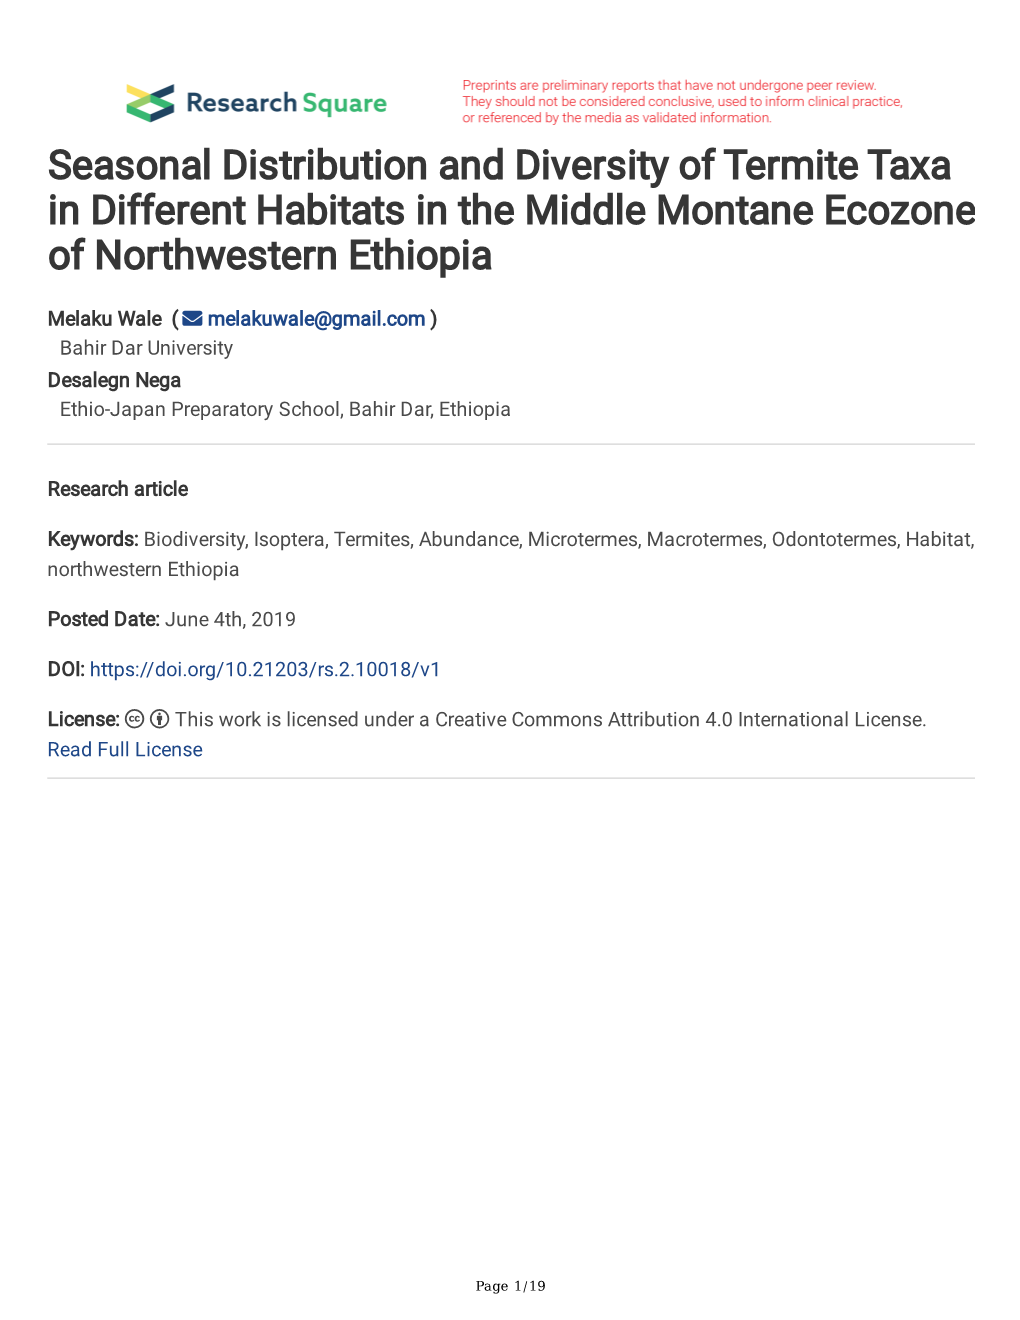 Seasonal Distribution and Diversity of Termite Taxa in Different Habitats in the Middle Montane Ecozone of Northwestern Ethiopia